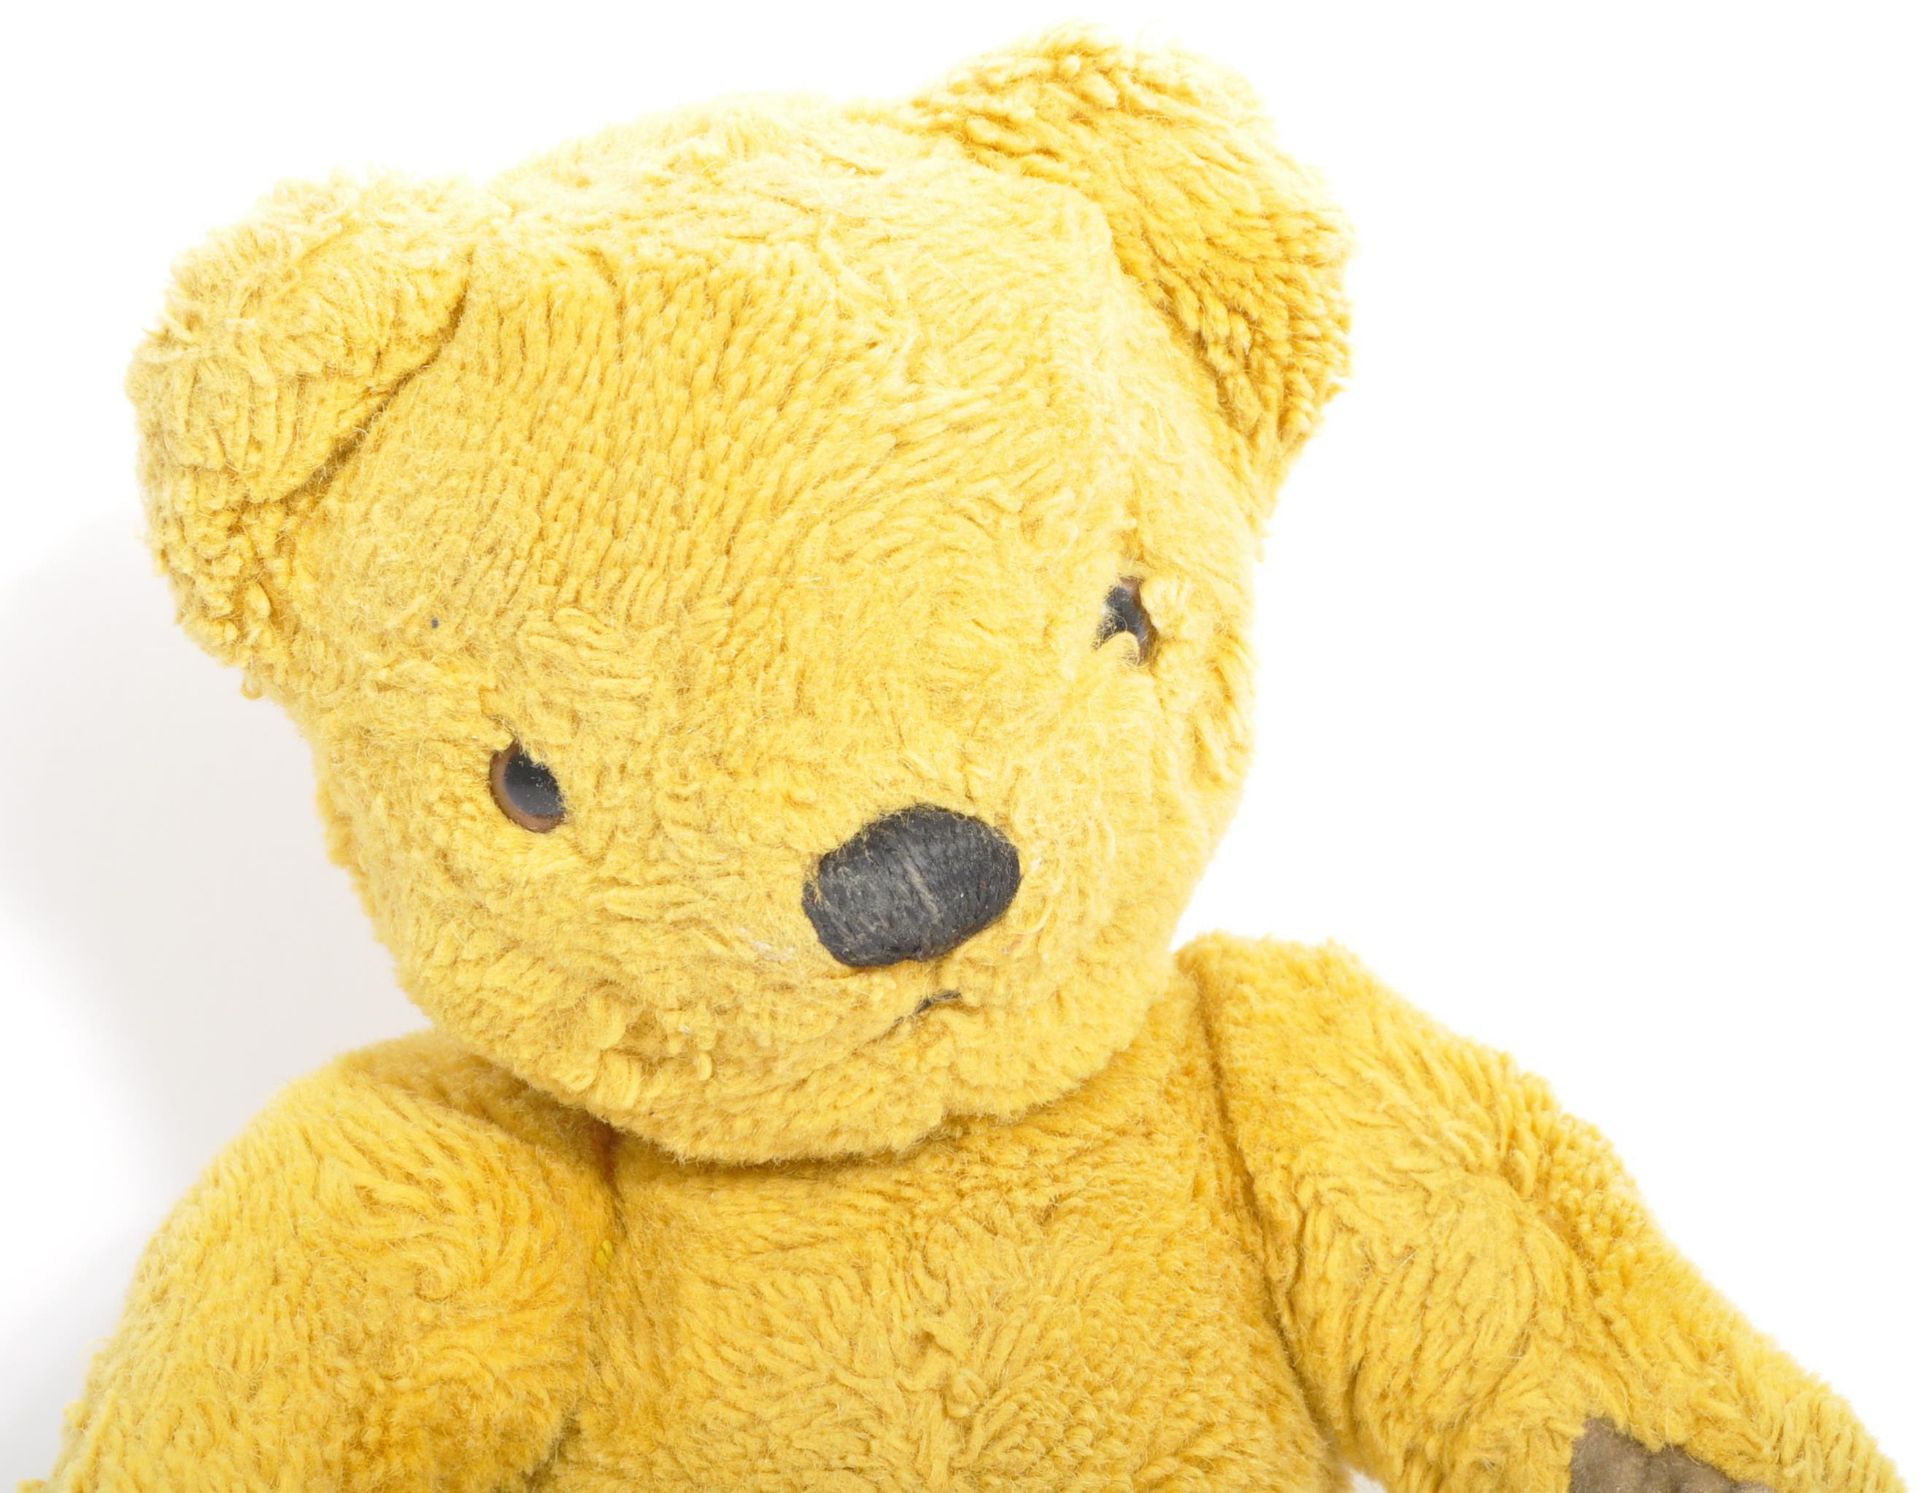 VINTAGE MERRYTHOUGHT SOFT TOY TEDDY BEAR - Image 5 of 6